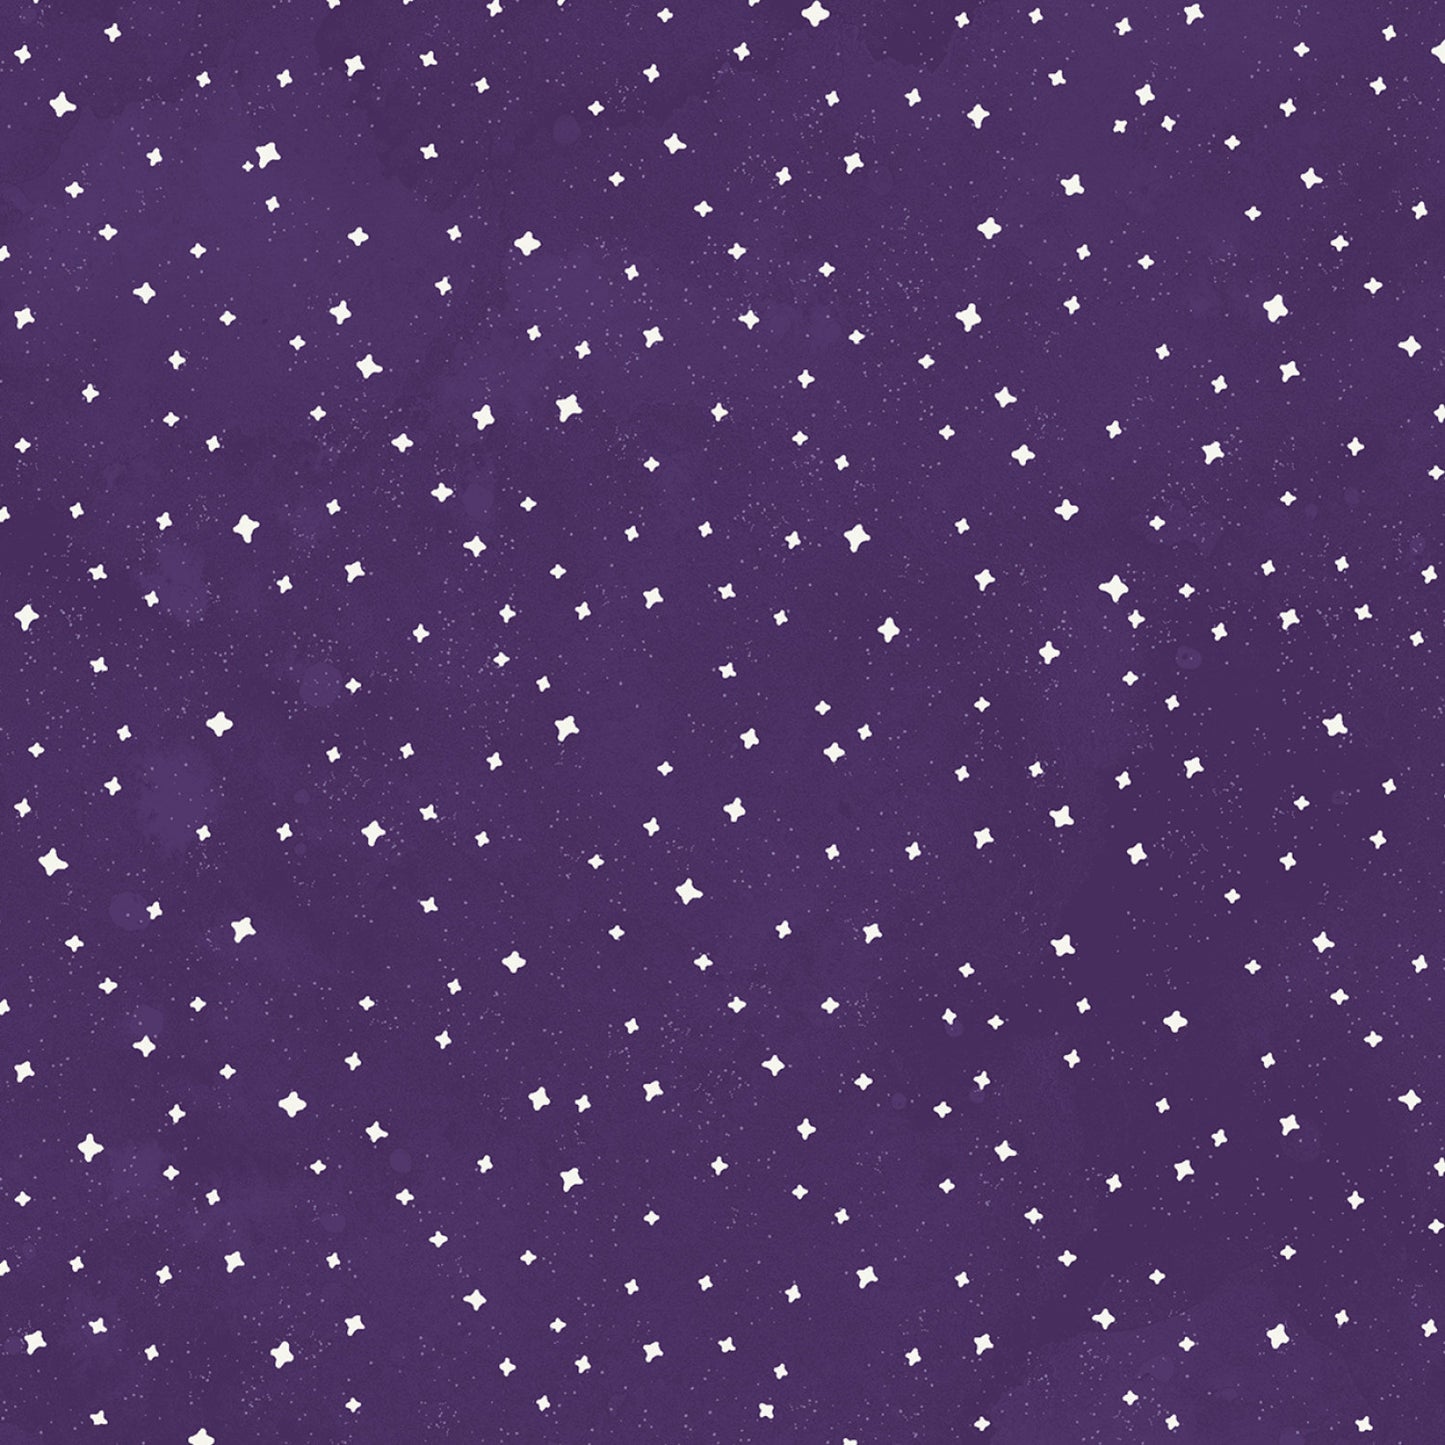 PREORDER ITEM - EXPECTED MAY 2024:  Toil & Trouble by Heatherlee Chan Collection Glow in the Dark Stars Dark Purple    Y4165-28 Cotton Woven Fabric